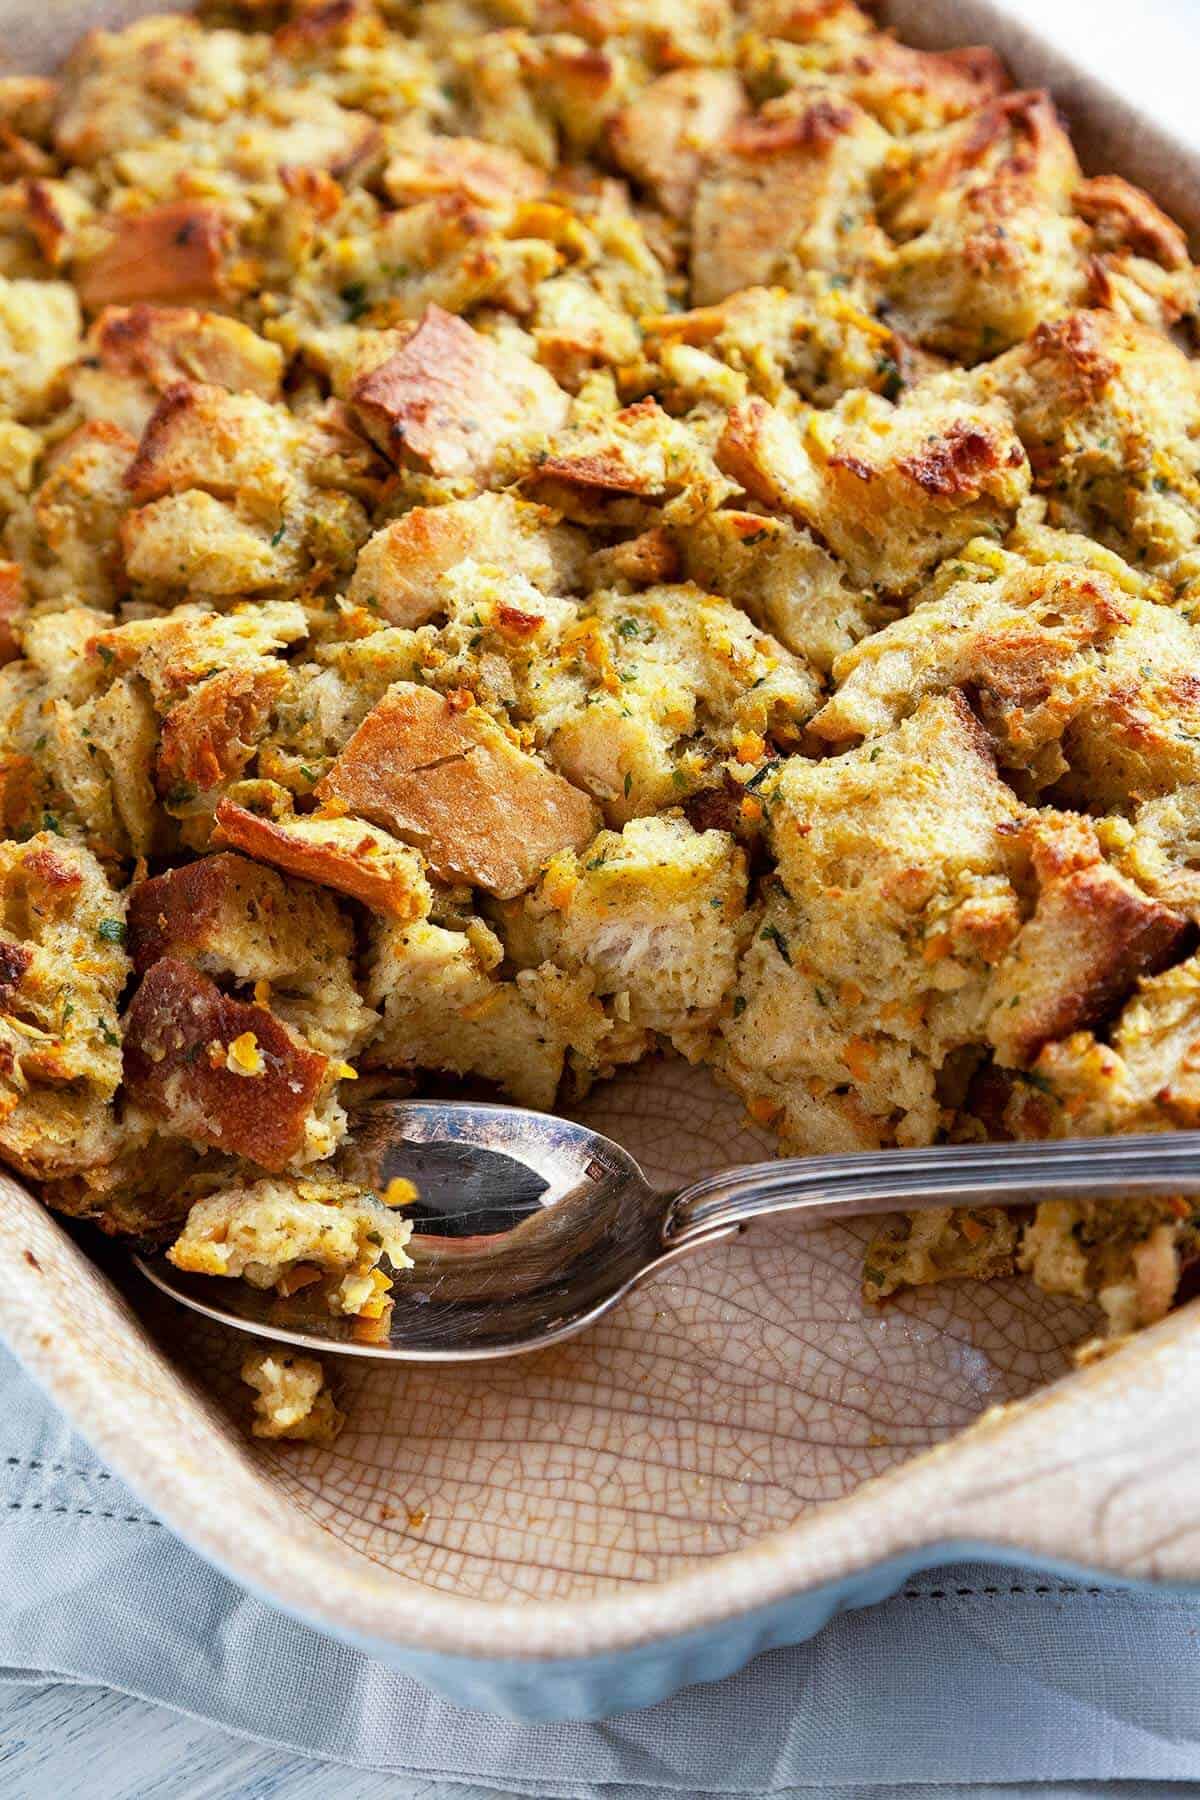 Cook's Illustrated - Are you all about the ease of boxed stuffing or the  homemade stuff? Let us know in the comments! Read our taste test of boxed  stuffing